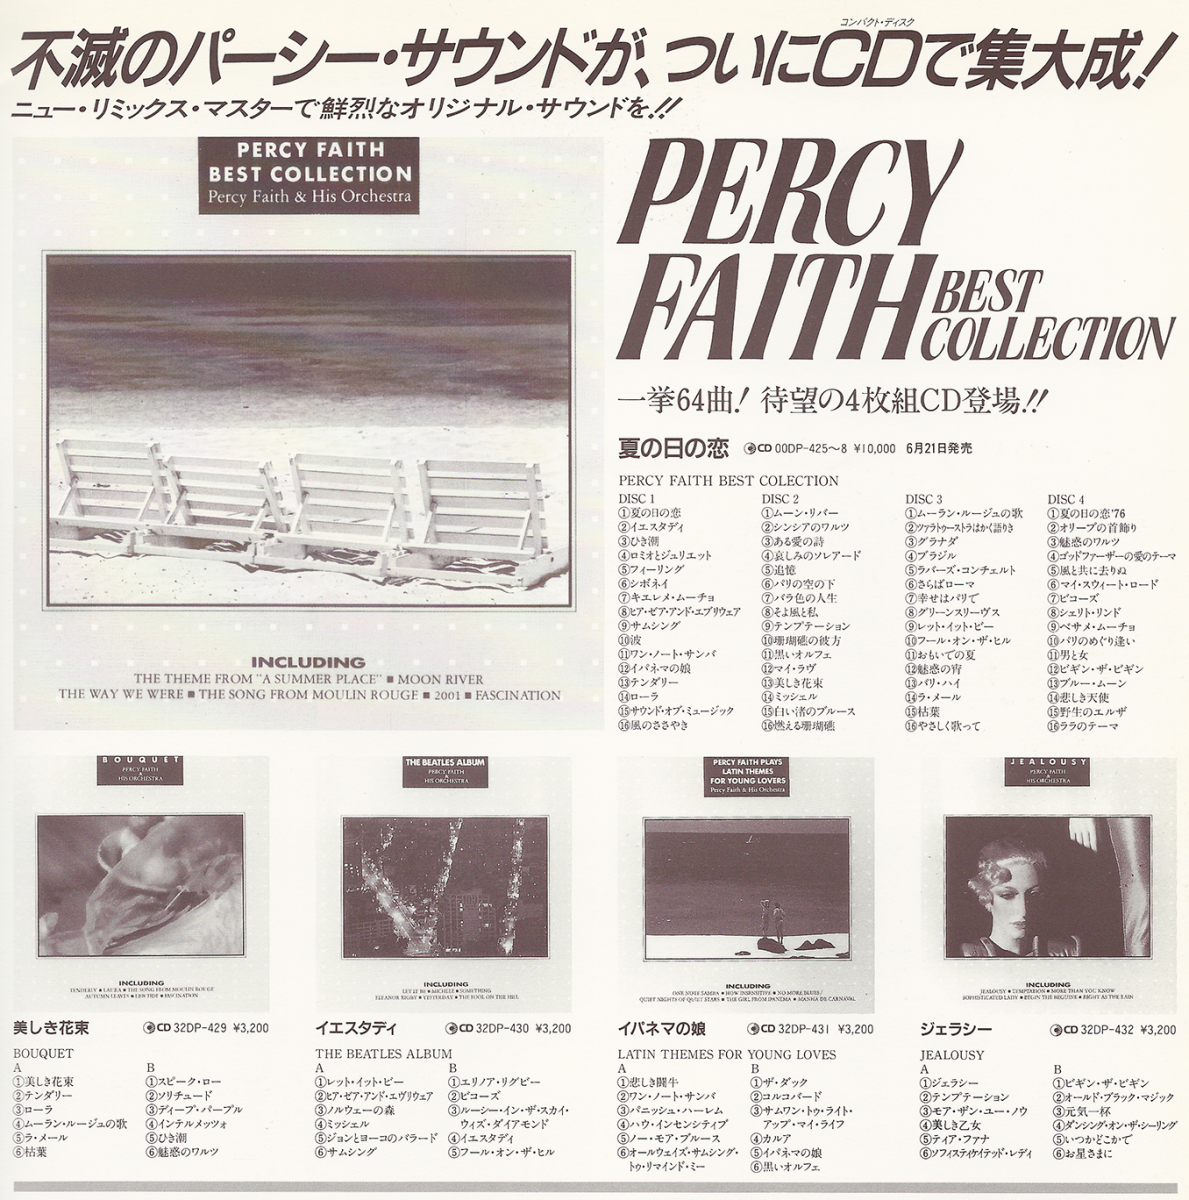 Percy Faith Best Collection advertisement (Japan, 1986)